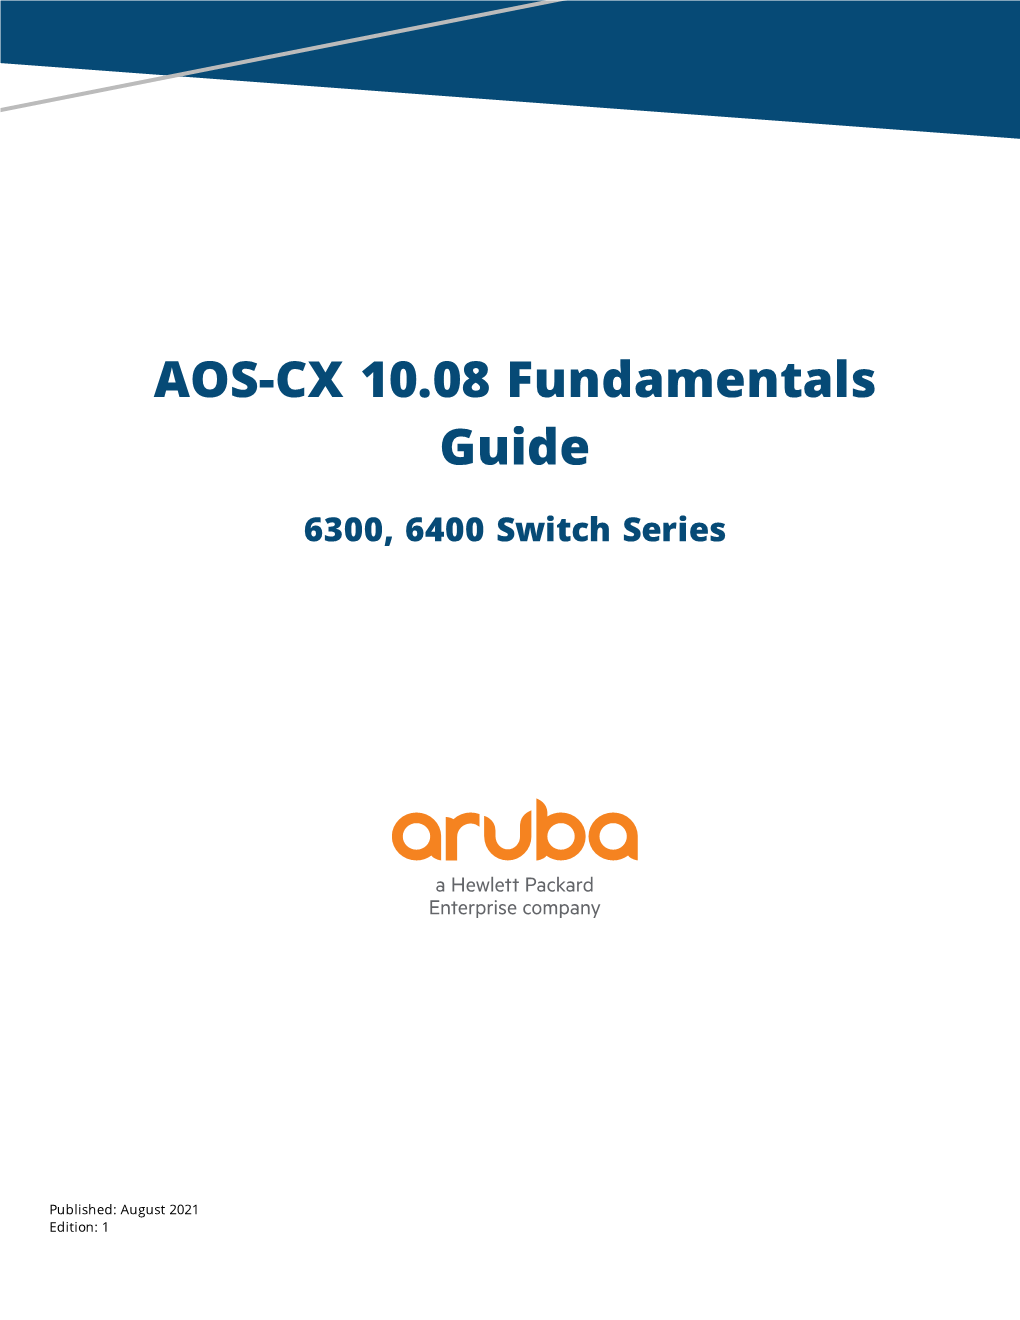 AOS-CX 10.08 Fundamentals Guide for 6300 and 6400 Switches